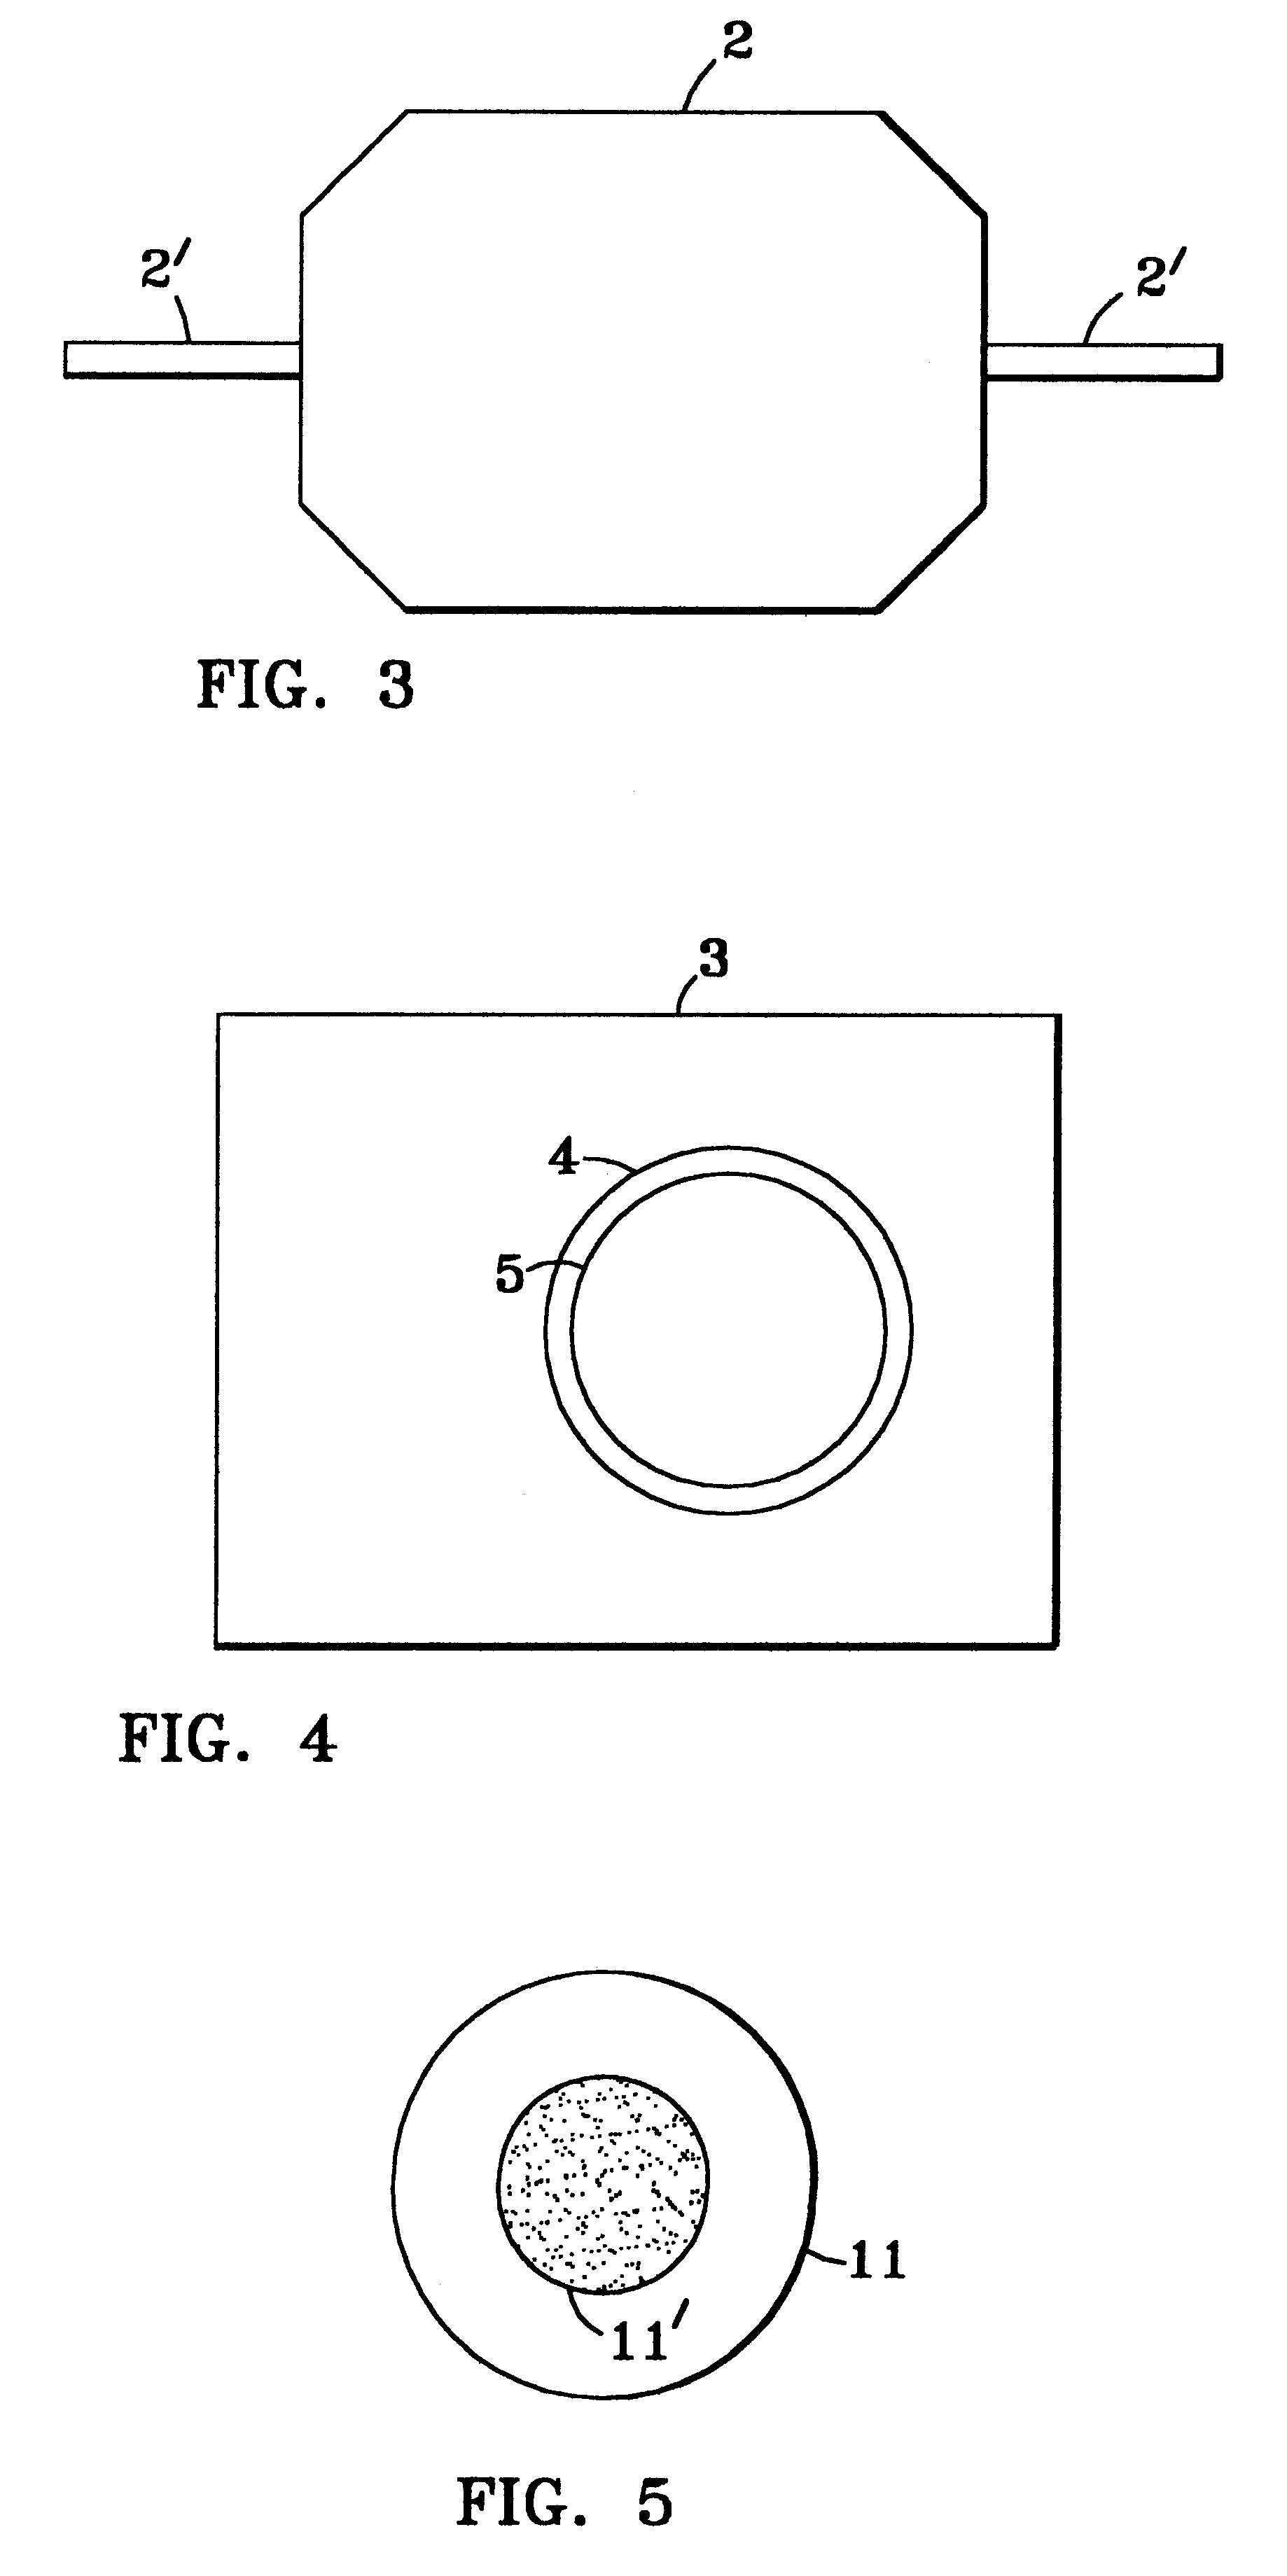 Method of linking membrane purification of hydrogen to its generation by steam reforming of a methanol-like fuel